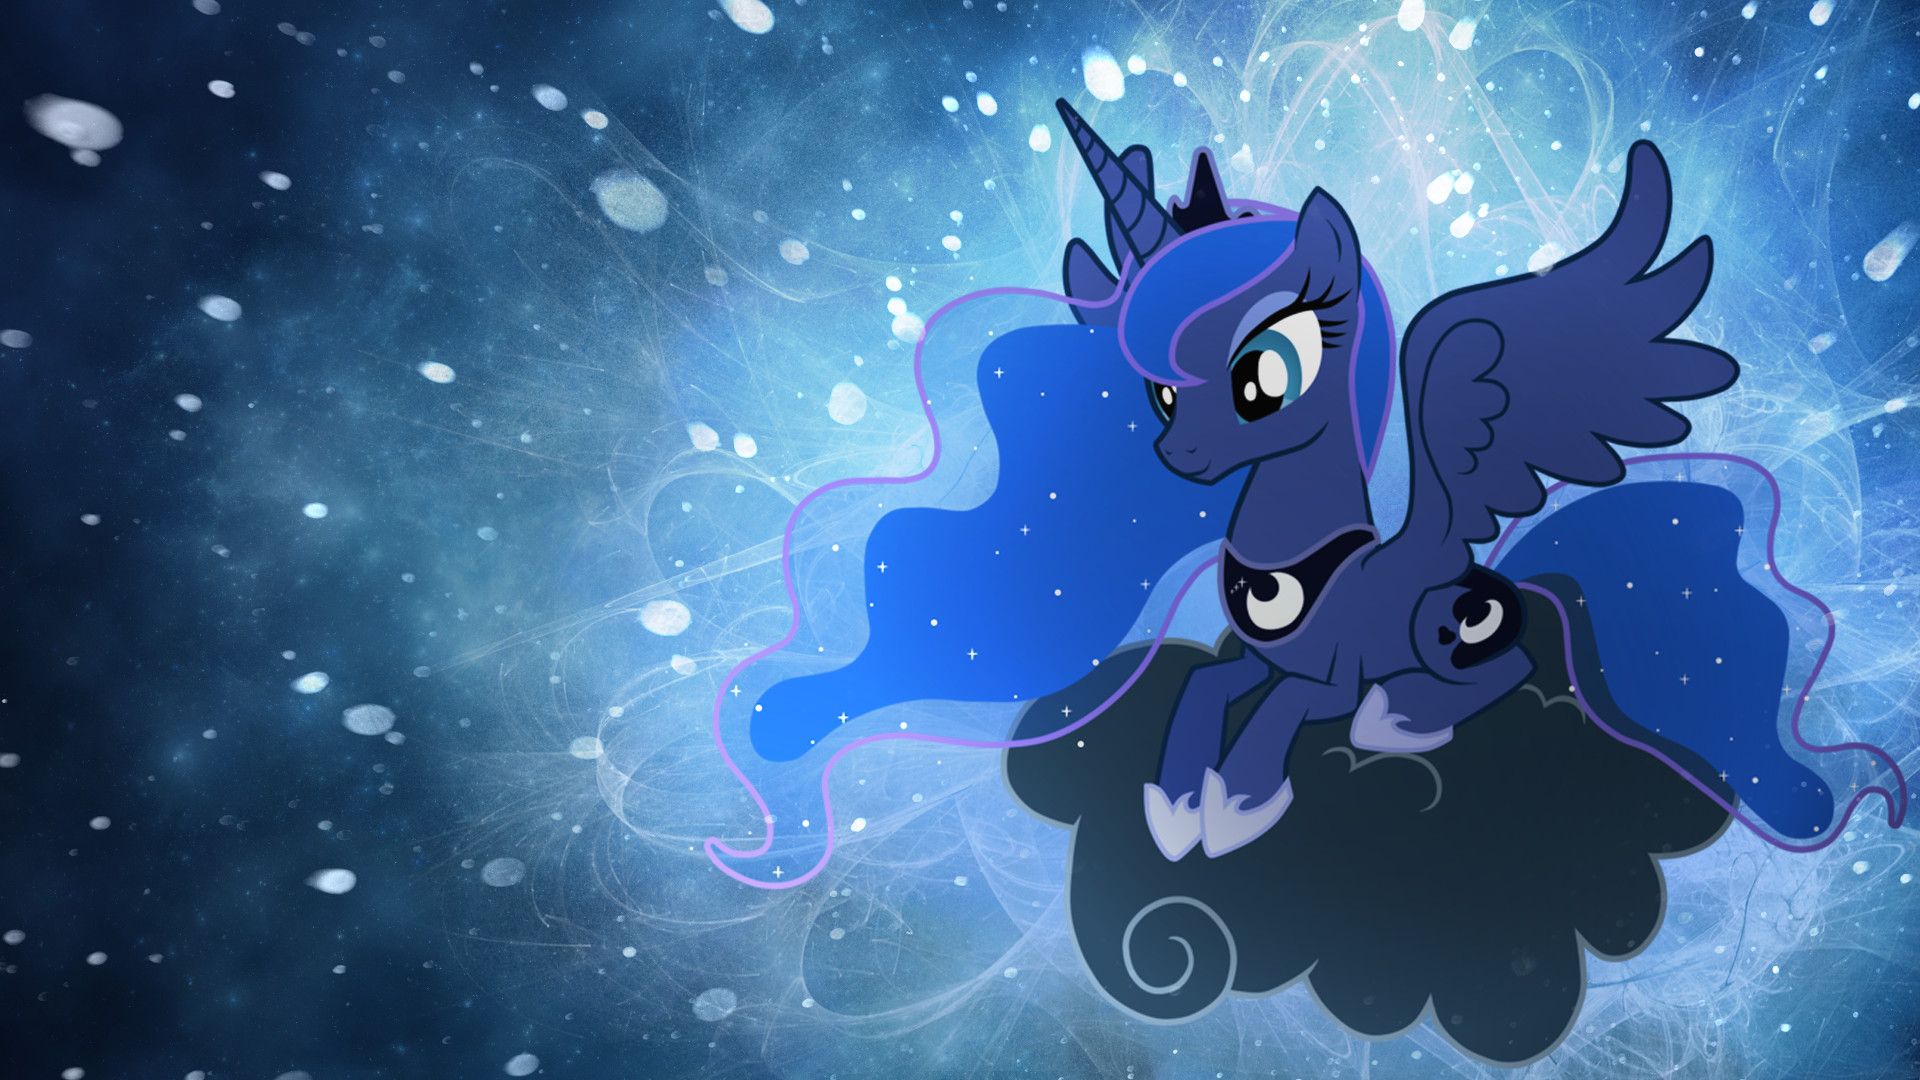 1920x1080 Princess Luna wallpaper by artist-overmare.png